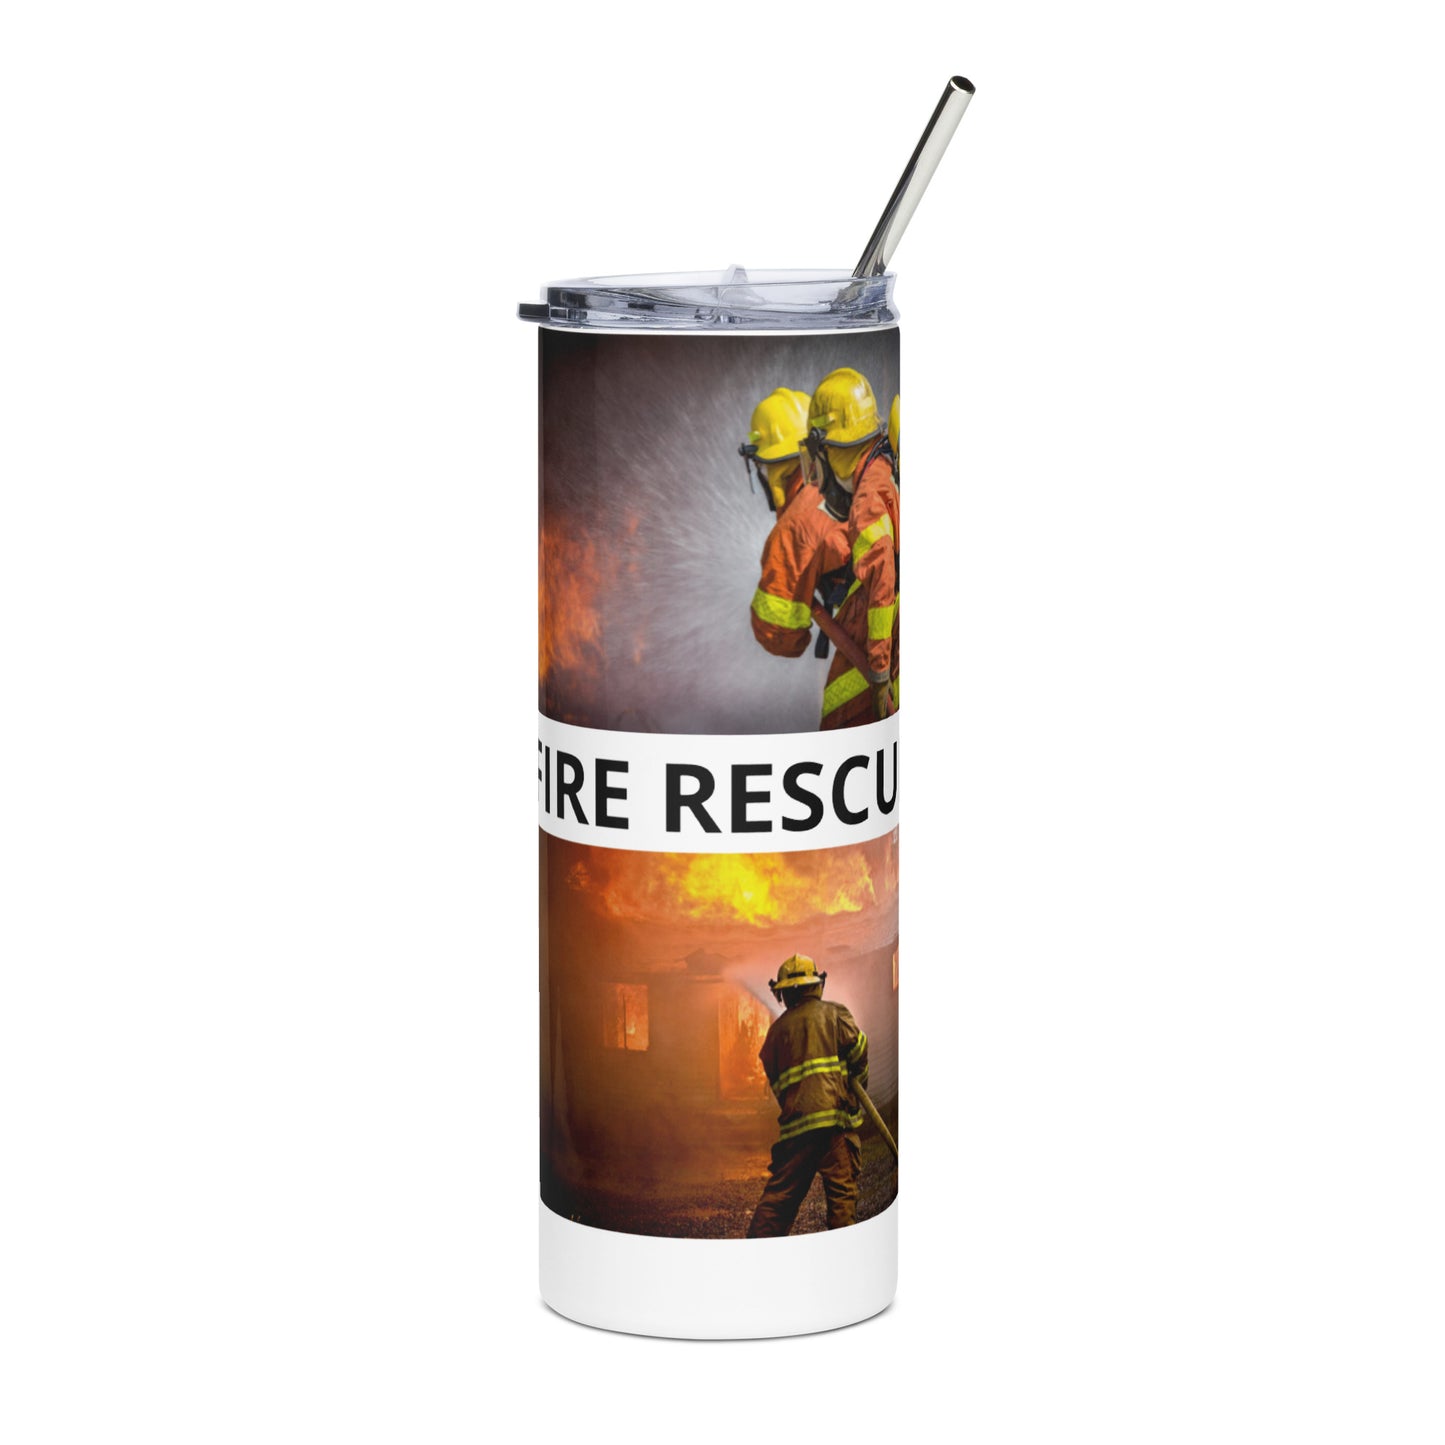 Firefighter Rescue 954 Stainless steel tumbler